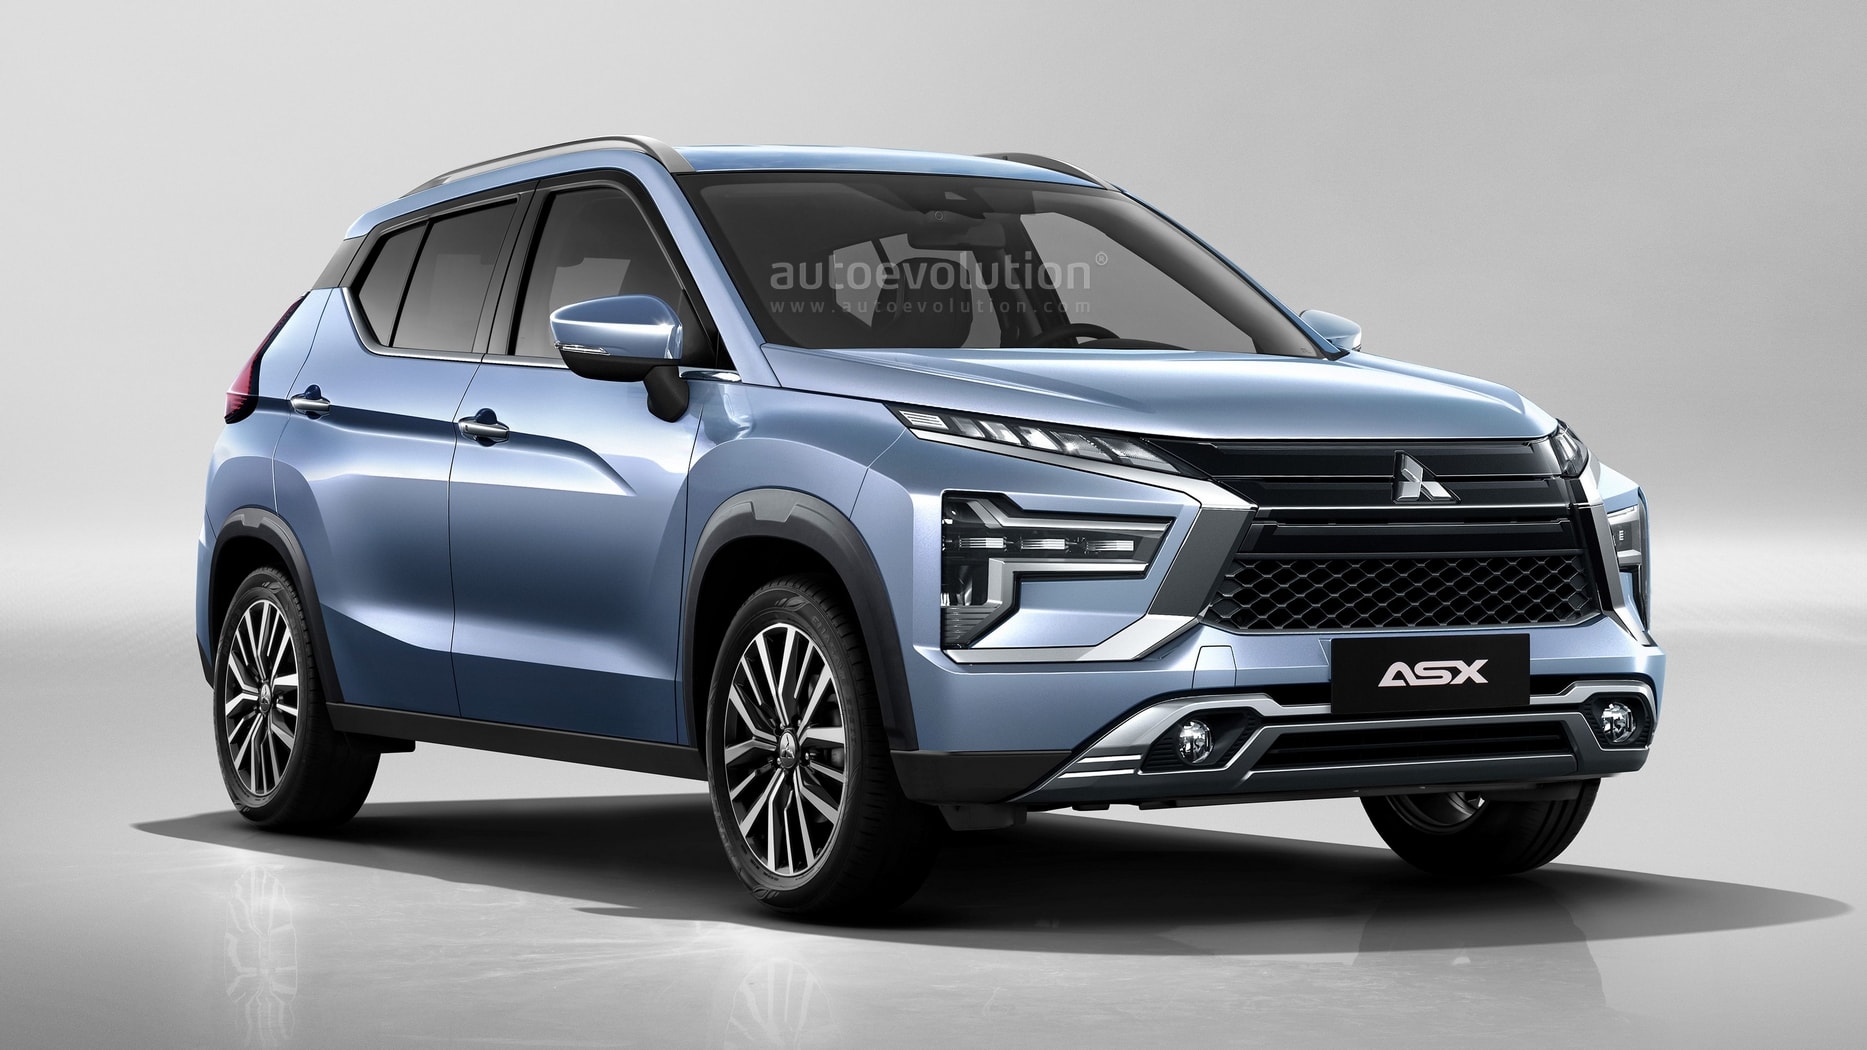 https://s1.cdn.autoevolution.com/images/news/mitsubishi-asx-gets-rendering-by-theottle-based-on-the-nissan-kicks-176395_1.jpg